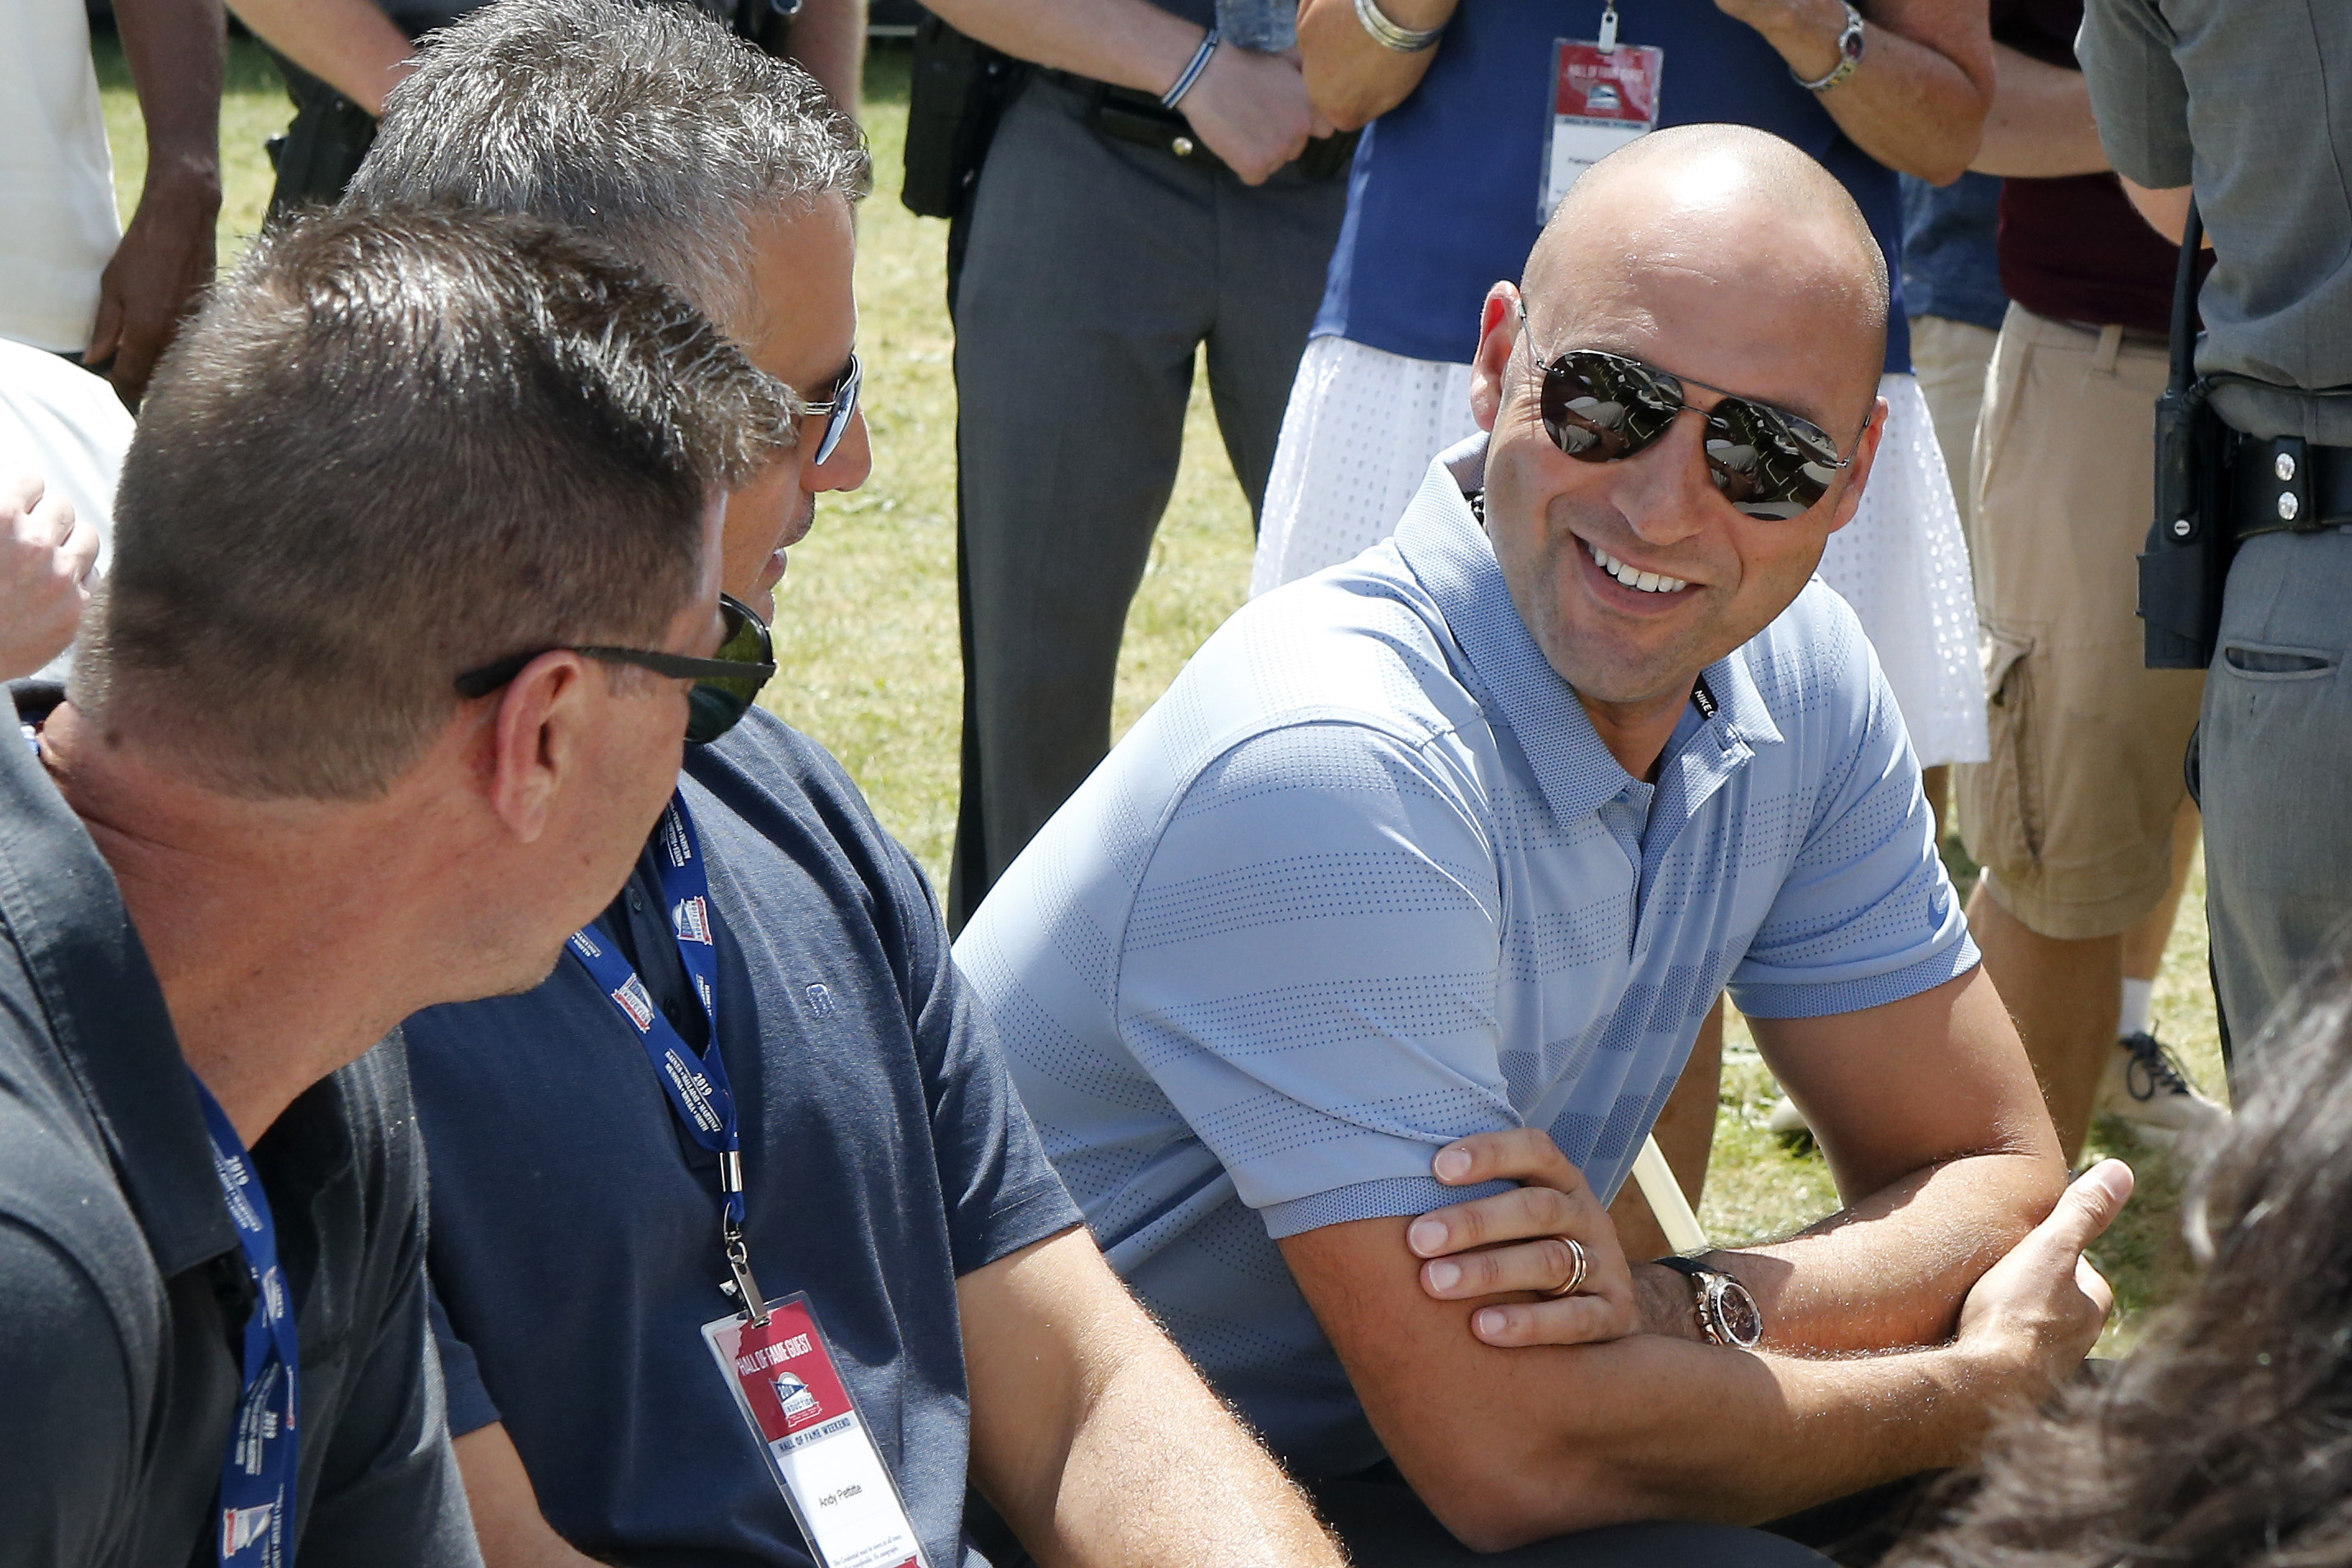 Derek Jeter Welcomes an MLB Legend to the Hall of Fame With